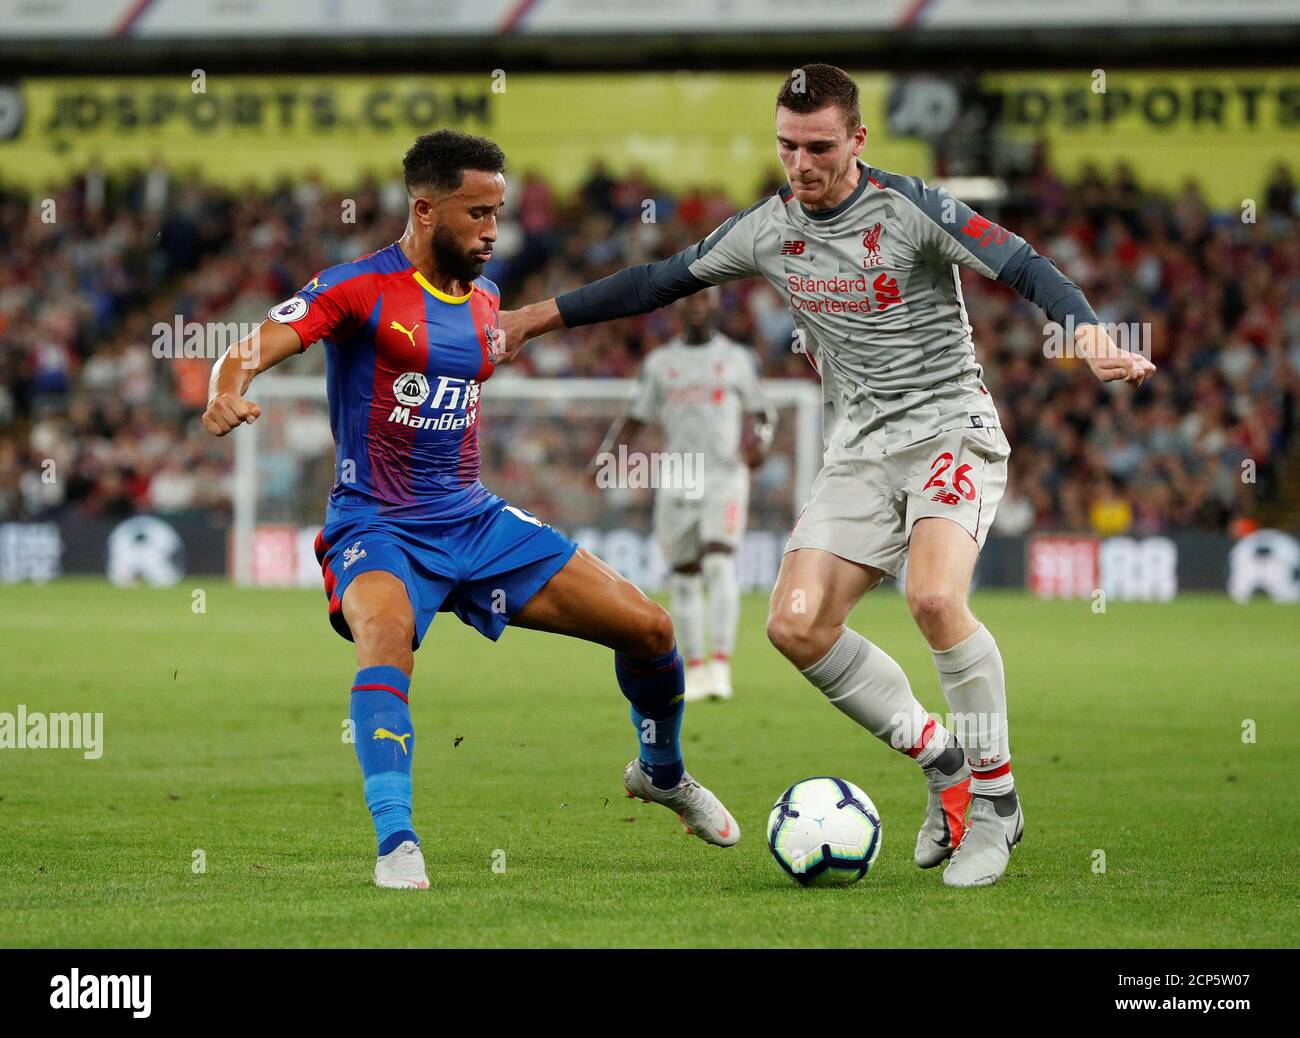 Soccer Football - Premier League - Crystal Palace v Liverpool - Selhurst Park, London, Britain - August 20, 2018  Liverpool's Andrew Robertson in action with Crystal Palace's Andros Townsend                  Action Images via Reuters/John Sibley  EDITORIAL USE ONLY. No use with unauthorized audio, video, data, fixture lists, club/league logos or 'live' services. Online in-match use limited to 75 images, no video emulation. No use in betting, games or single club/league/player publications.  Please contact your account representative for further details. Stock Photo